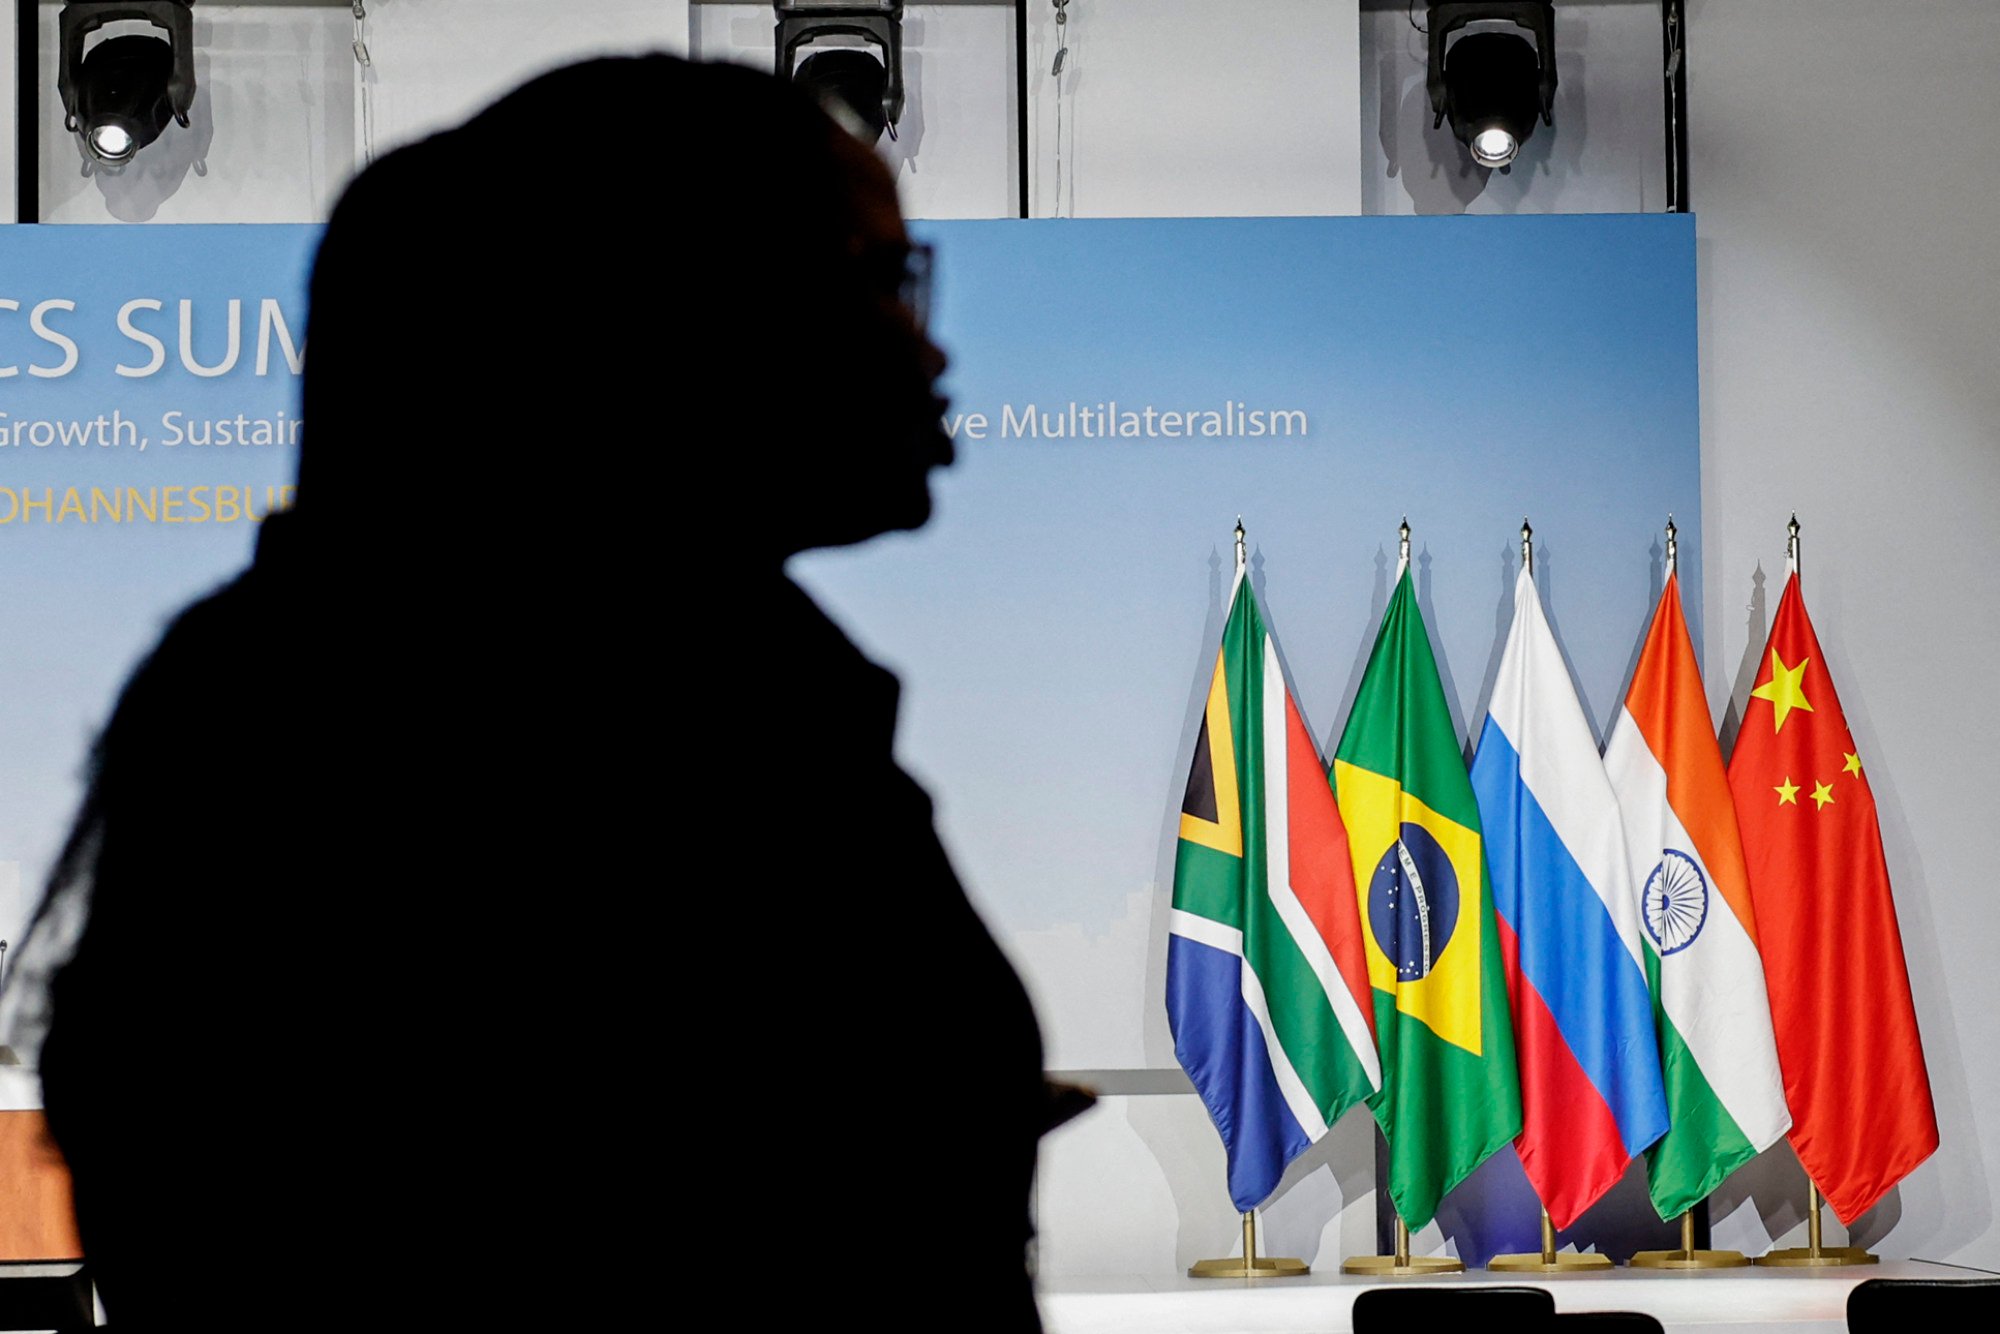 People pass a table with the flags of South Africa, Brazil, Russia, India and China during the Brics summit at the Sandton Convention Centre in Johannesburg, on August 24. Photo: AFP